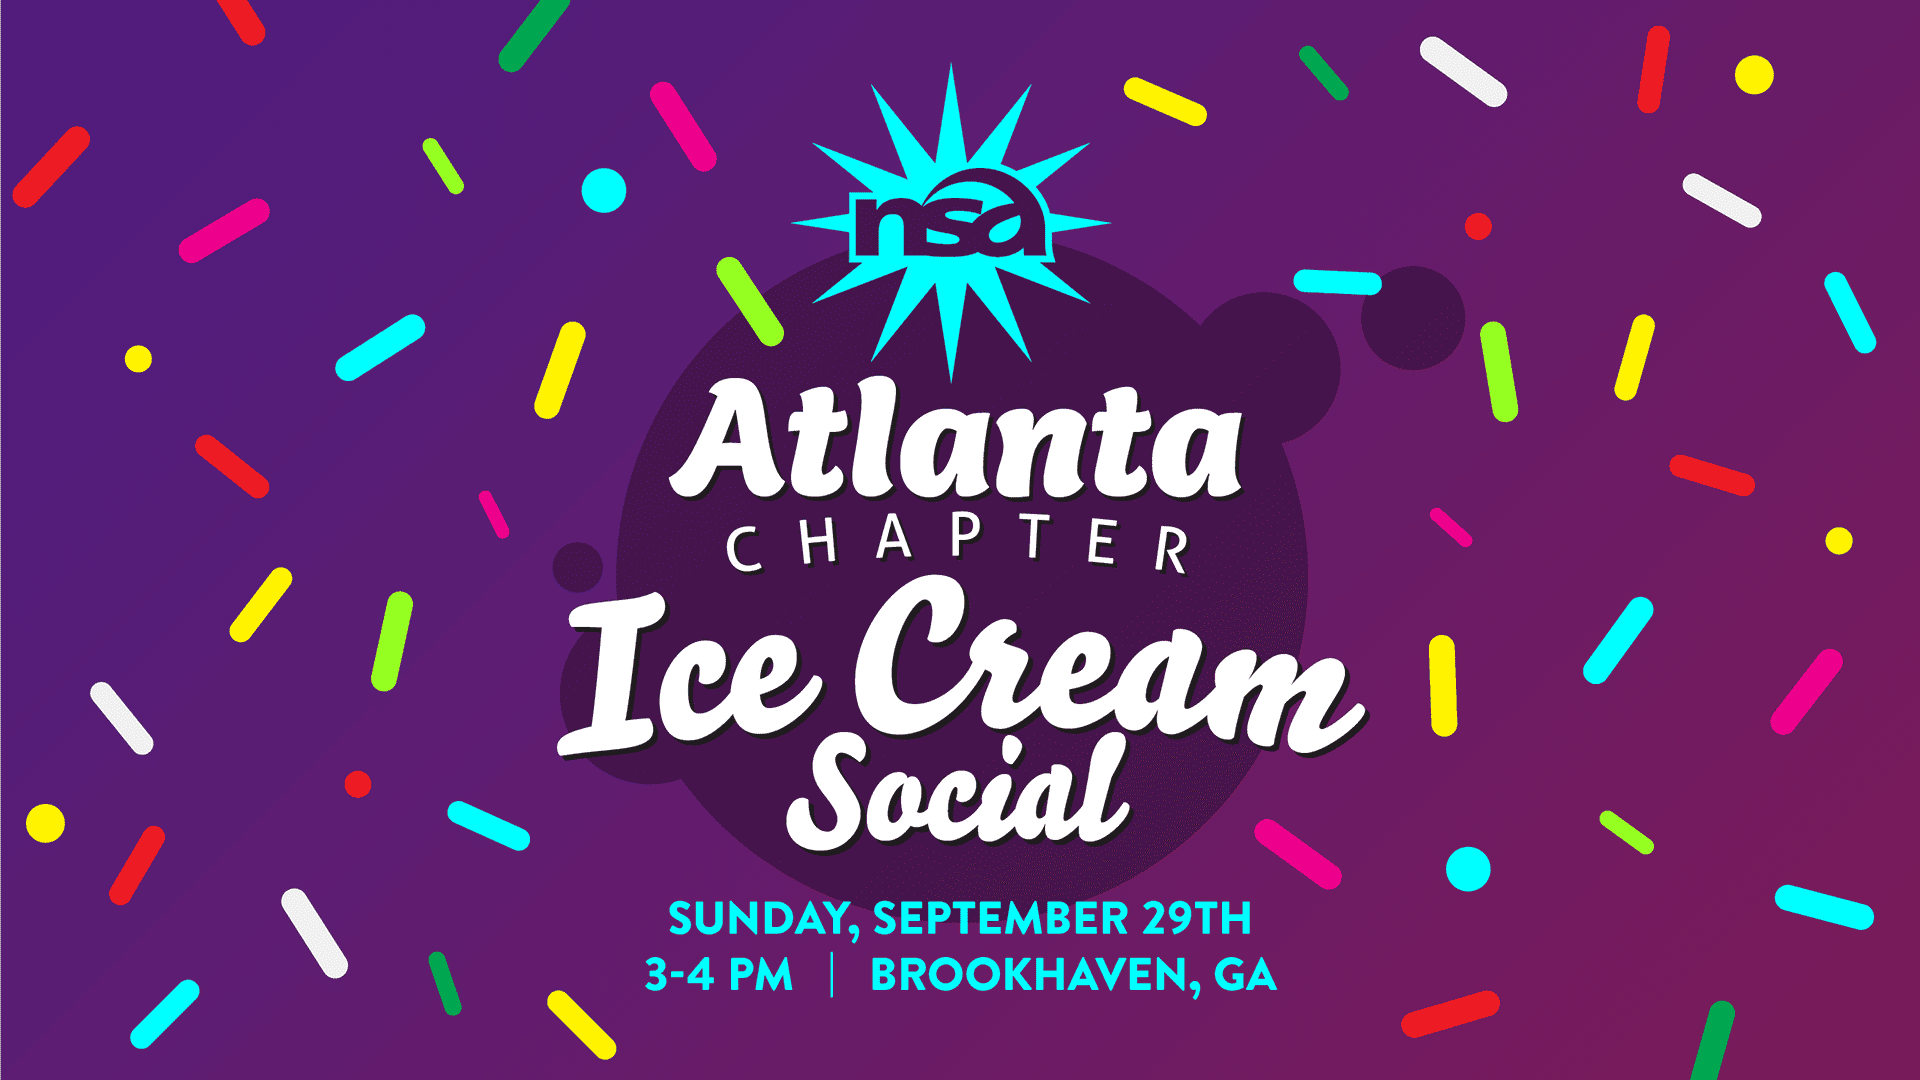 Colorful promotional graphic for an event titled "Atlanta Chapter Ice Cream Social" by the NSA. The event is on Sunday, September 29th, from 3-4 PM in Brookhaven, GA. The background features vibrant confetti and sprinkles on a gradient purple background.